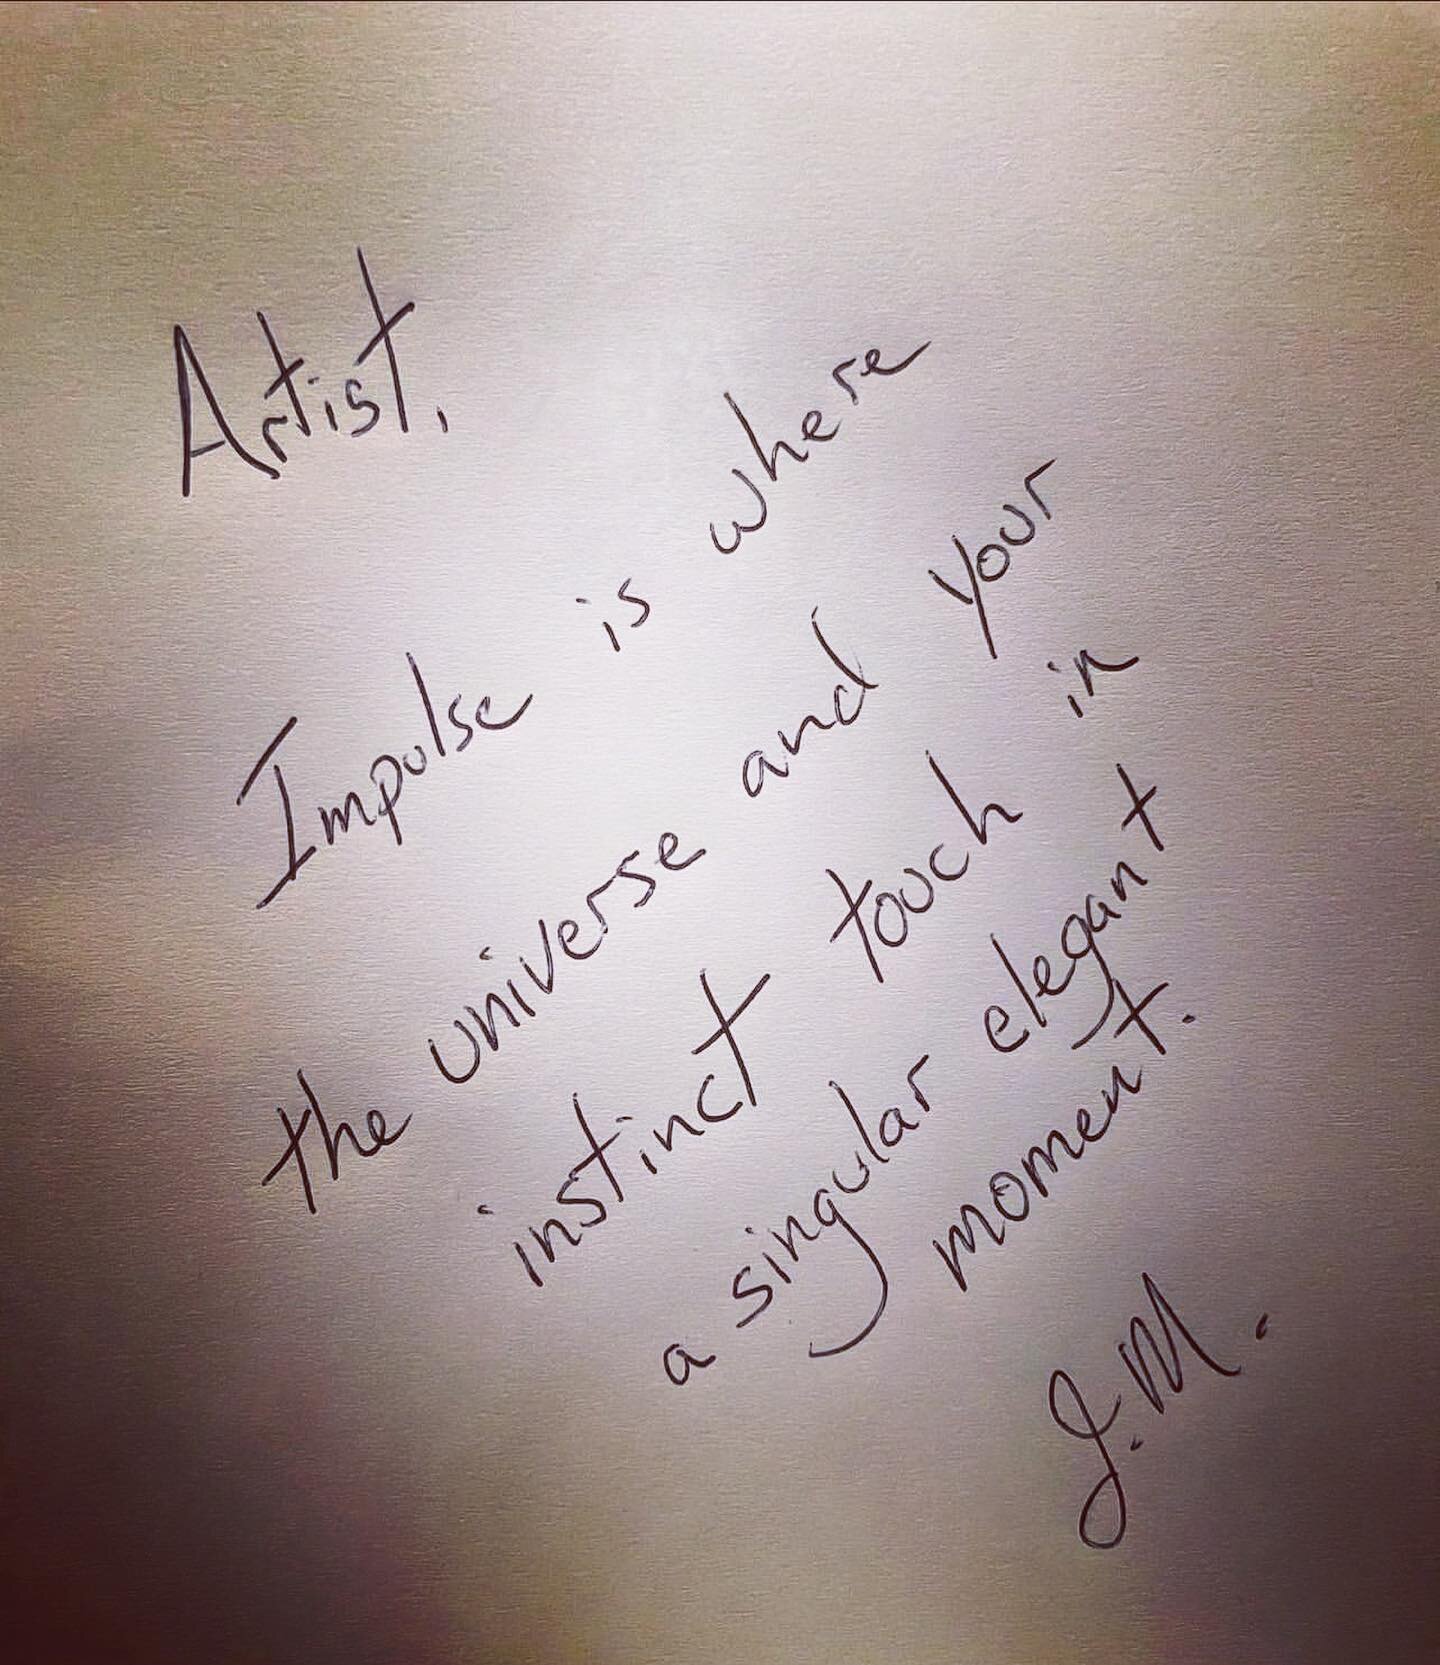 Artist allowing the impulse brings you closer to the authentic you.